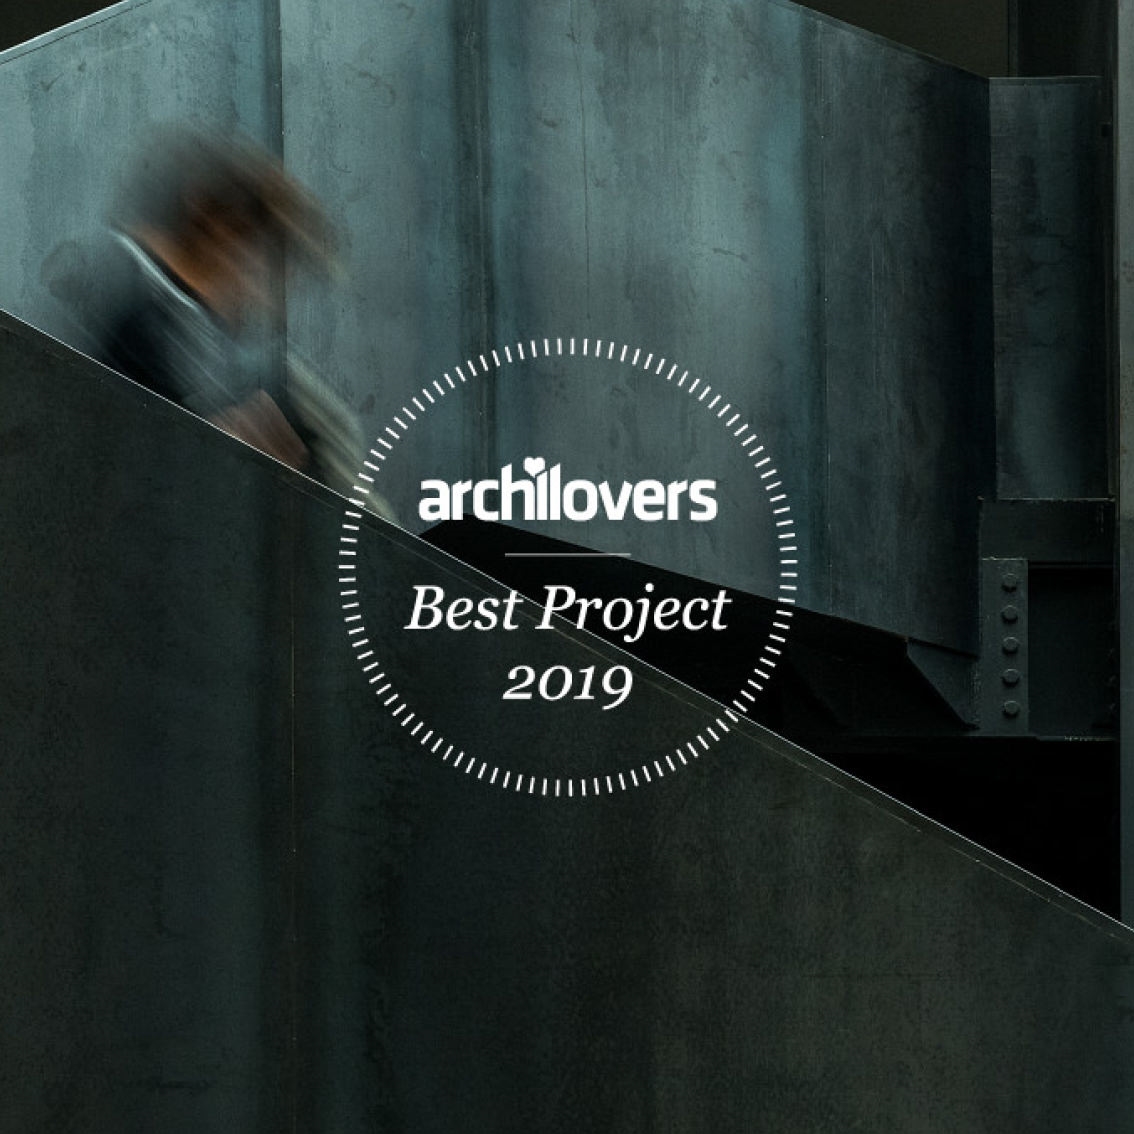 Archilovers Best Project, 2019 MMAPROJECTS S.R.L.